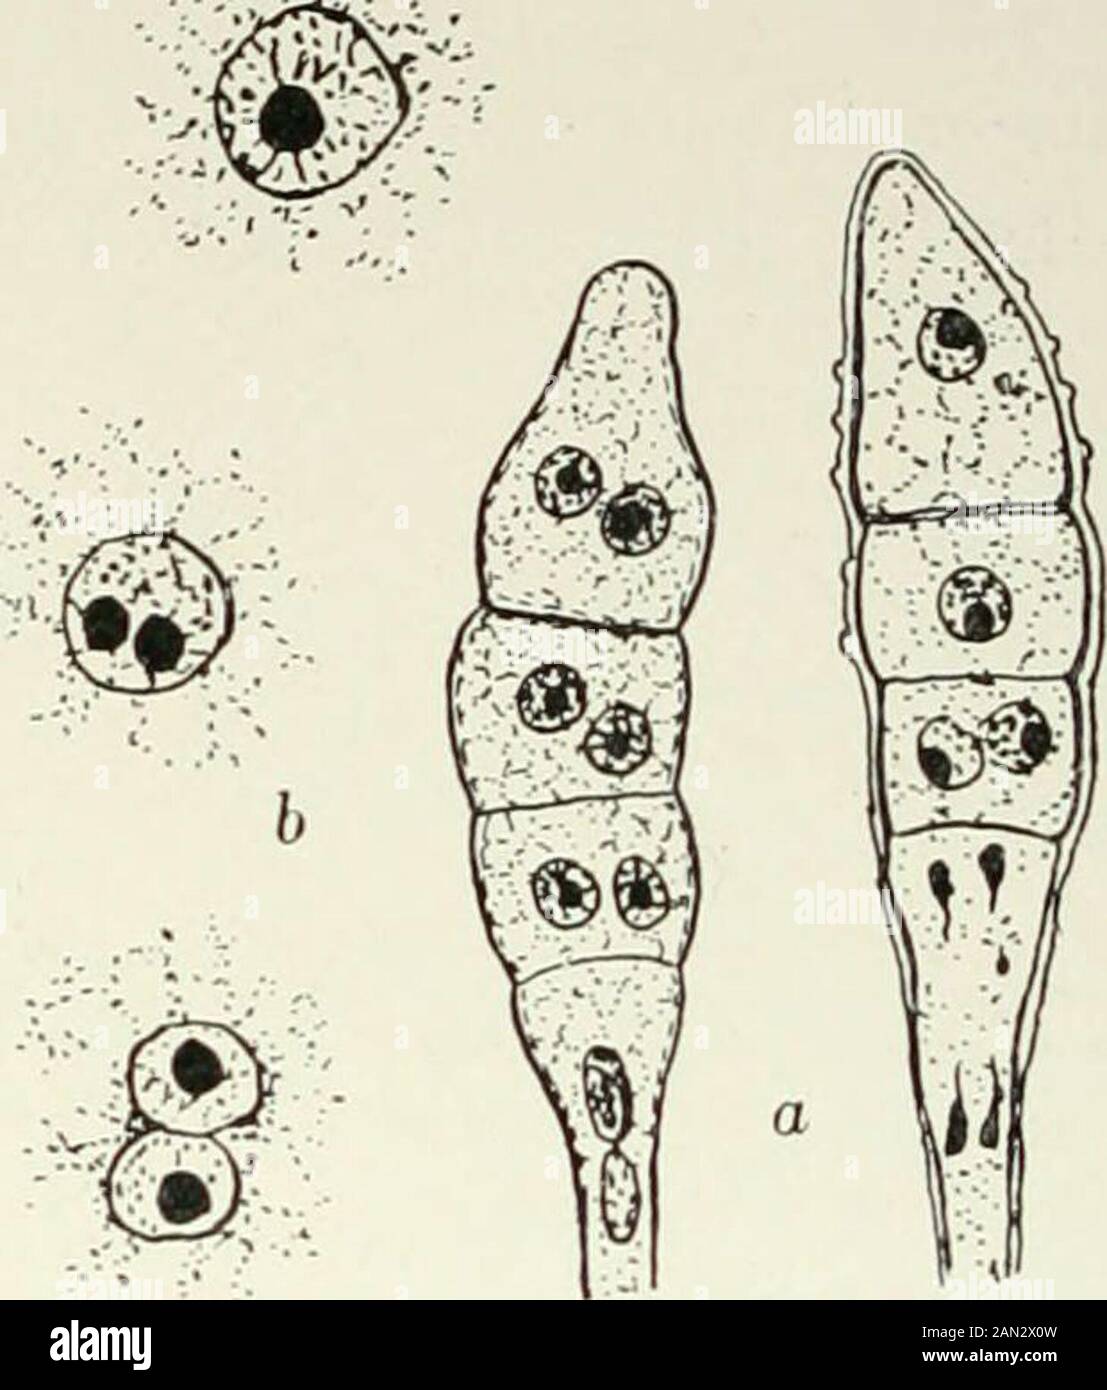 Fungi, Ascomycetes, Ustilaginales, Uredinales . Fij,. 181. Puccinia Podophylli S.;fertile cell of teleutosorus givingrisetoteleutospores; after Christ-man. Fig. 182. Pliraamidiitm violaceum Went.; a. teleuto-spores, x 1080; /&gt;. fusion of nuclei in teleutospore,x 1520; after Blackman. It may be hazarded that in the Uredinales the similarity of the physio-logical history of the nuclei before they become associated is responsiblefor a minimum of attraction between them, so that there is no sufficientlystrong impulse towards fusion till meiosis is about to take place ; being,however, in the sam Stock Photo